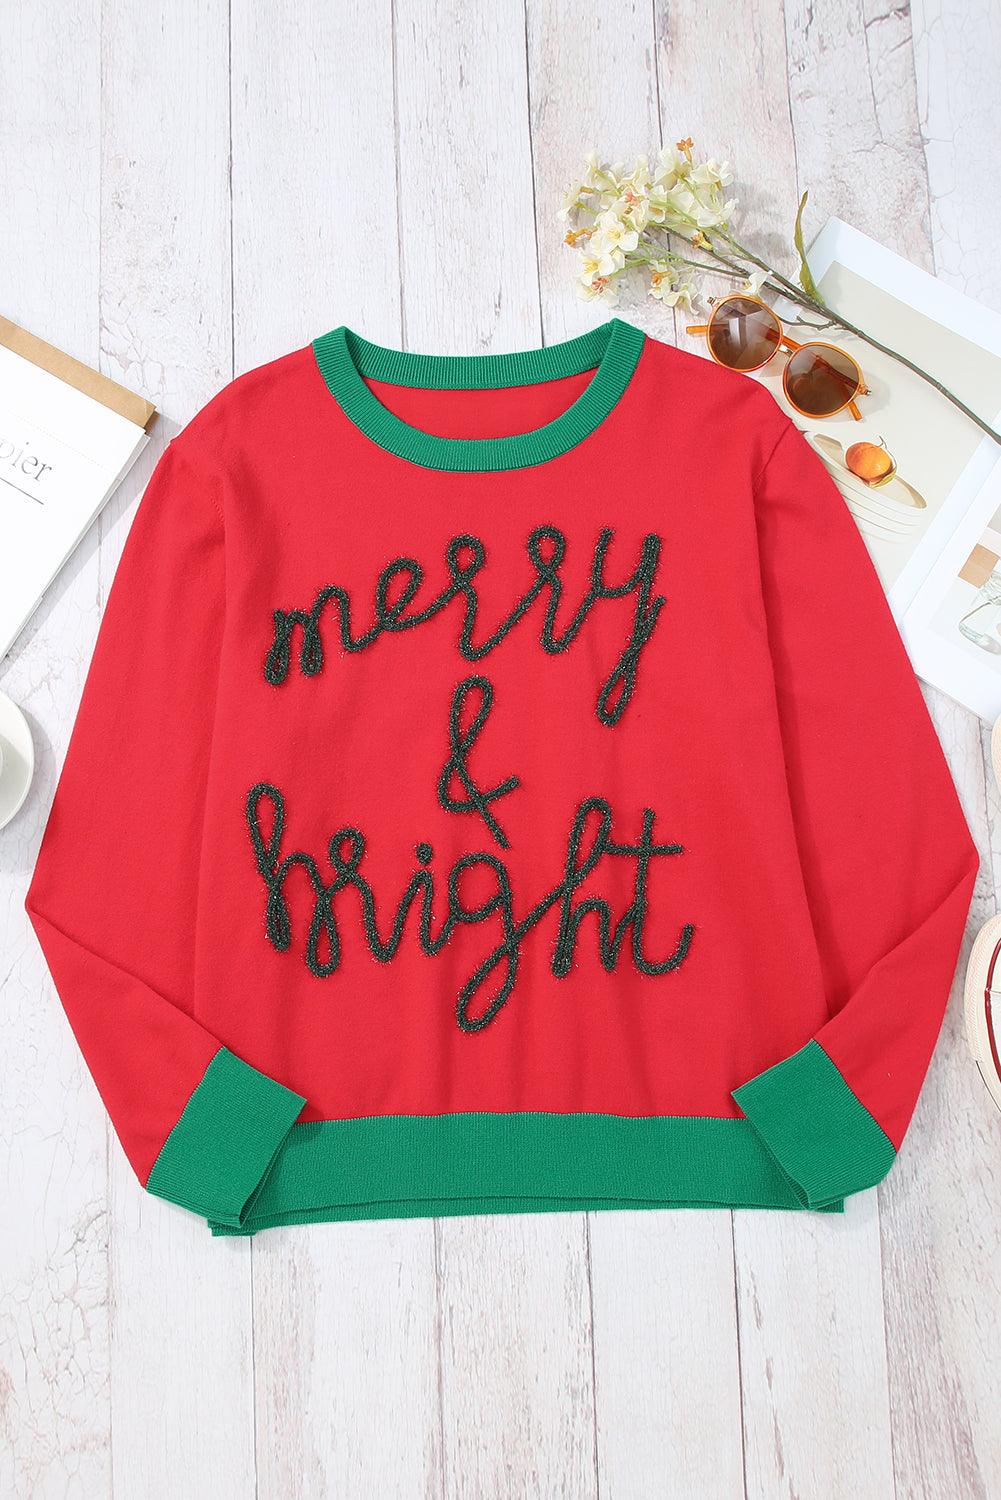 White Merry & Bright Round Neck Casual Sweater - L & M Kee, LLC